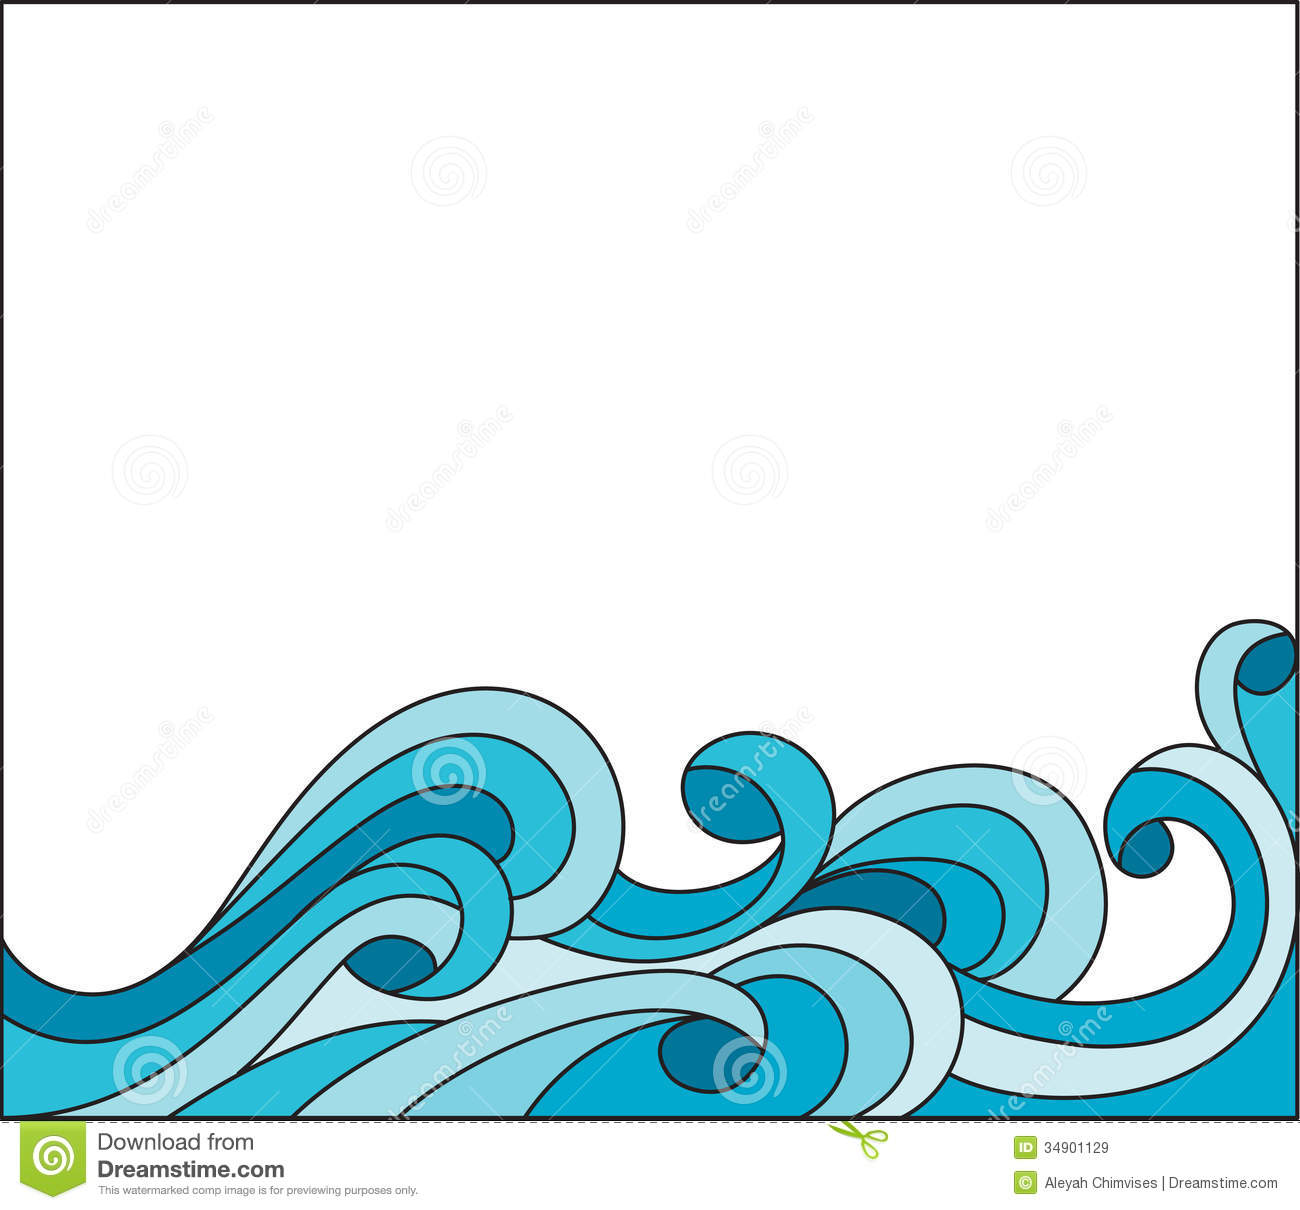 Ocean Waves Border Clipart Wave Royalty Free Stock Images